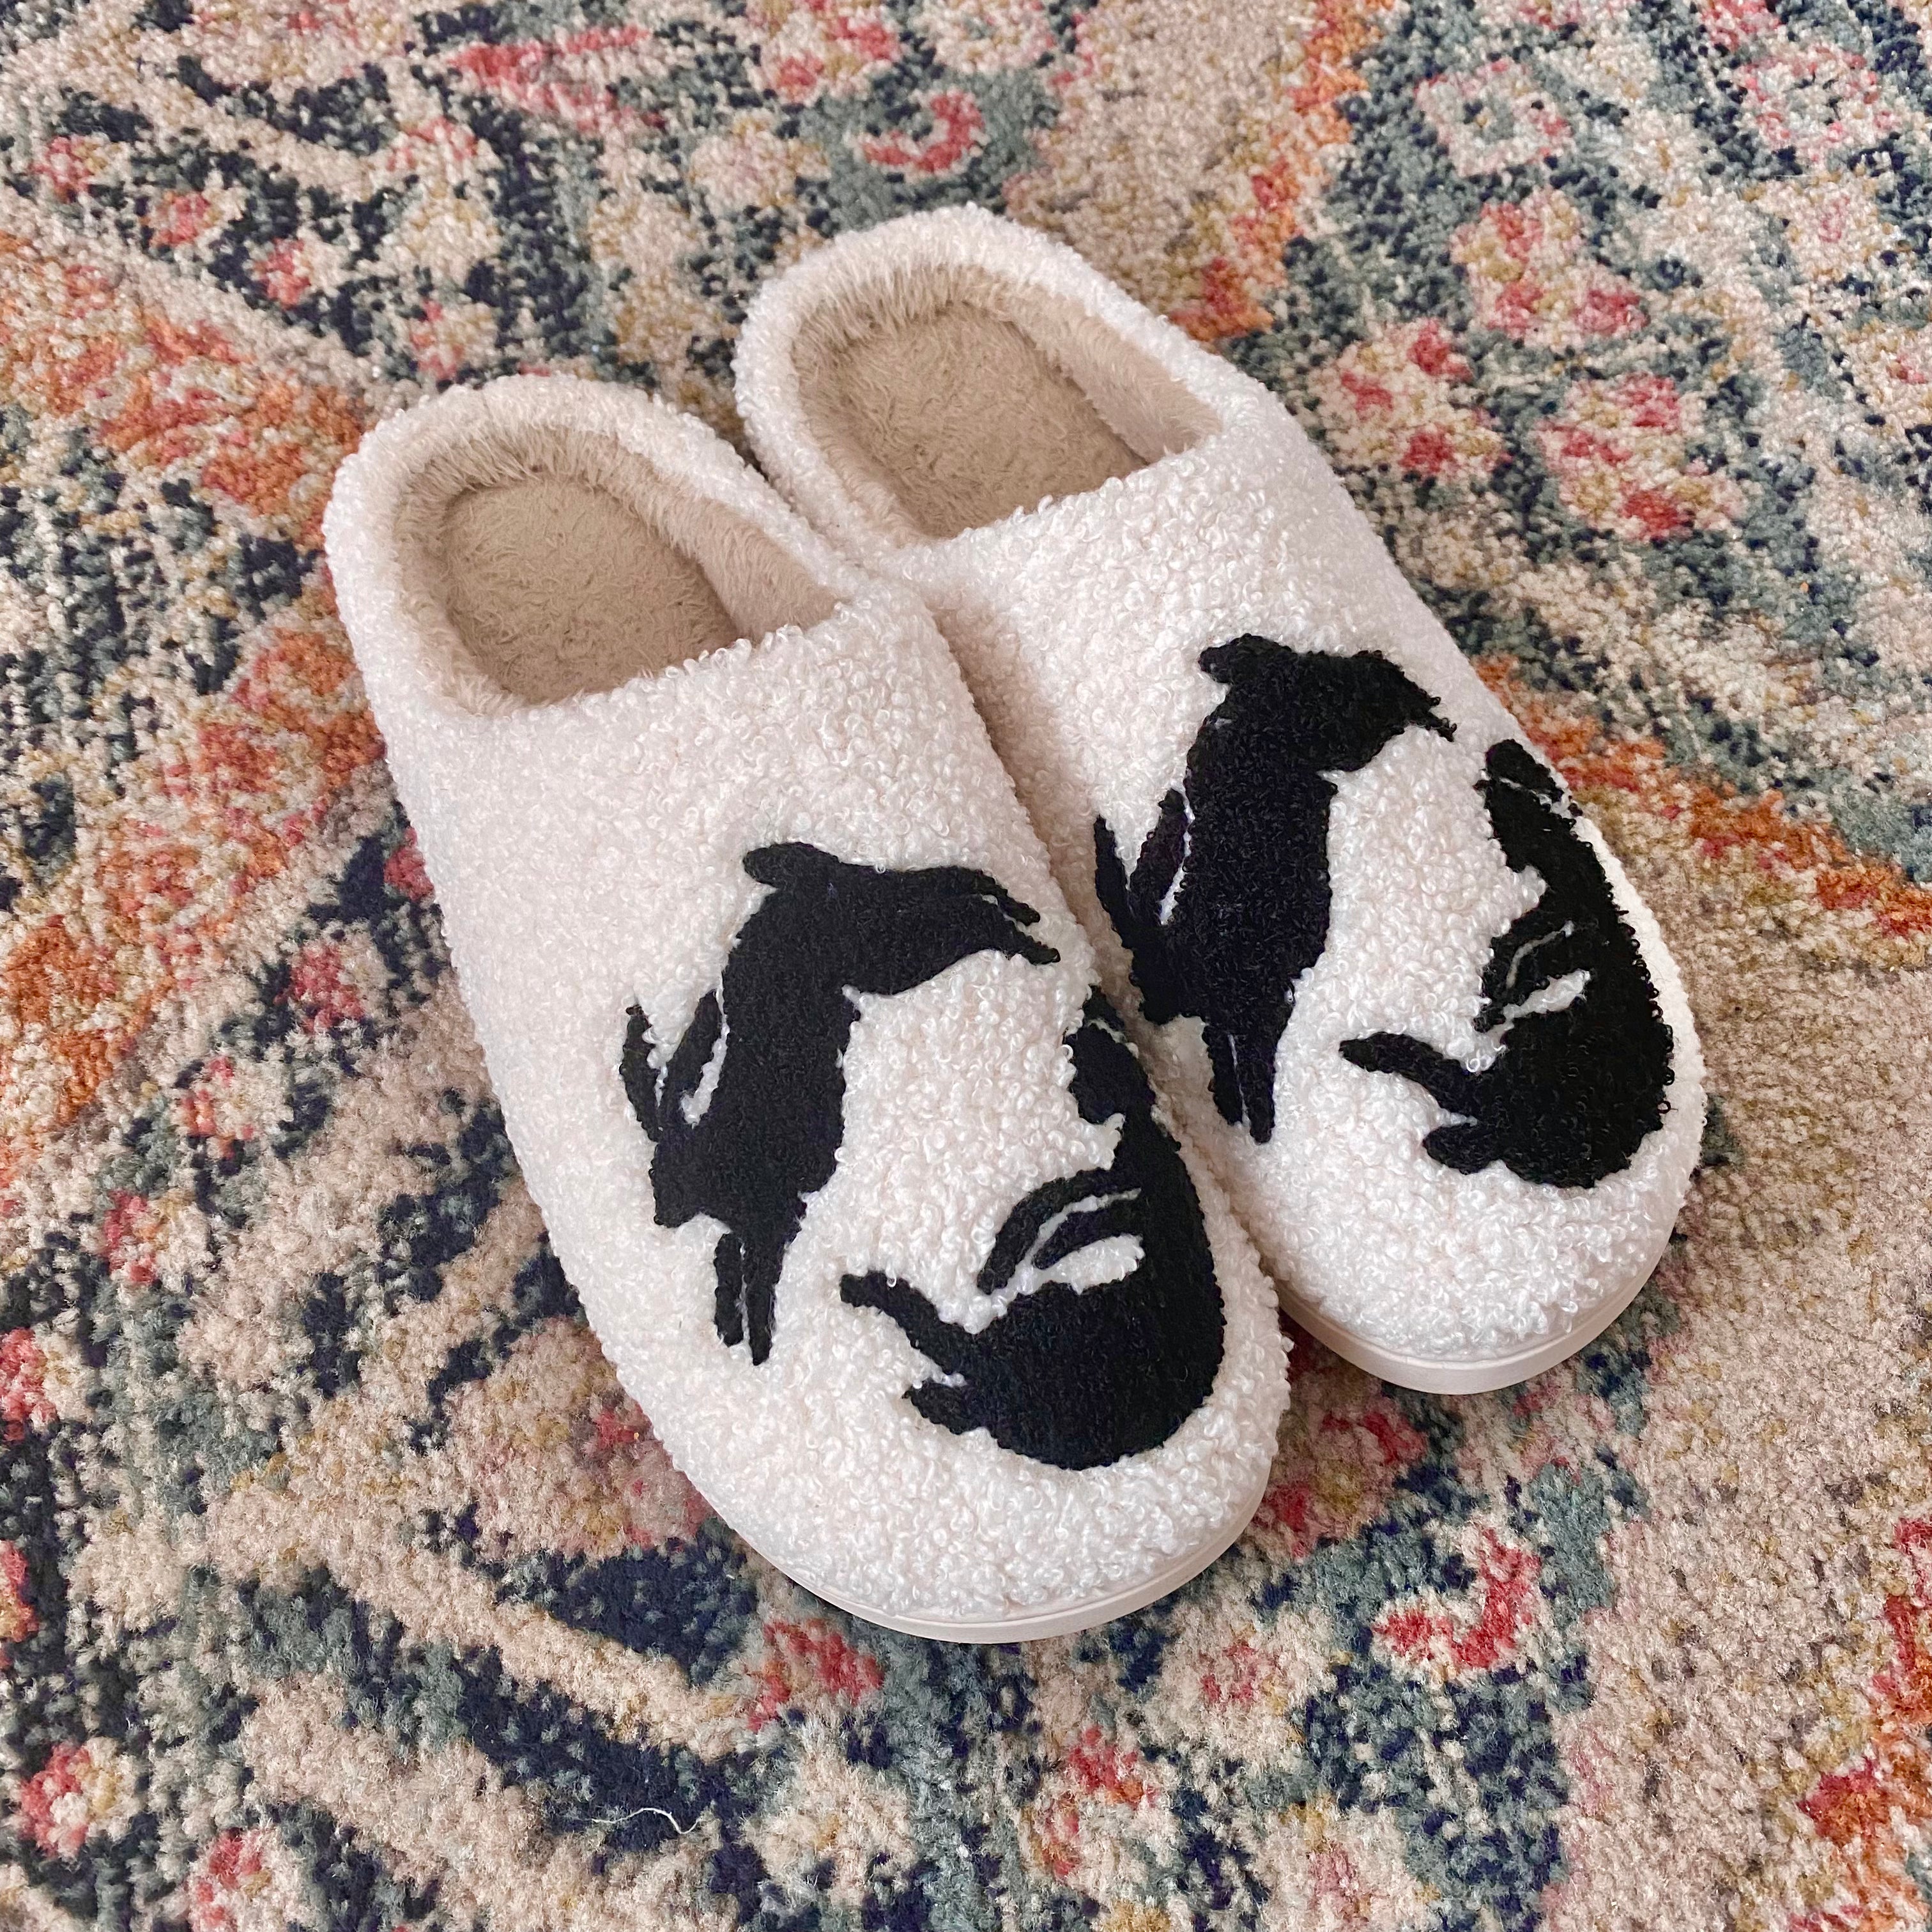 Love on Tour Bunny Slippers